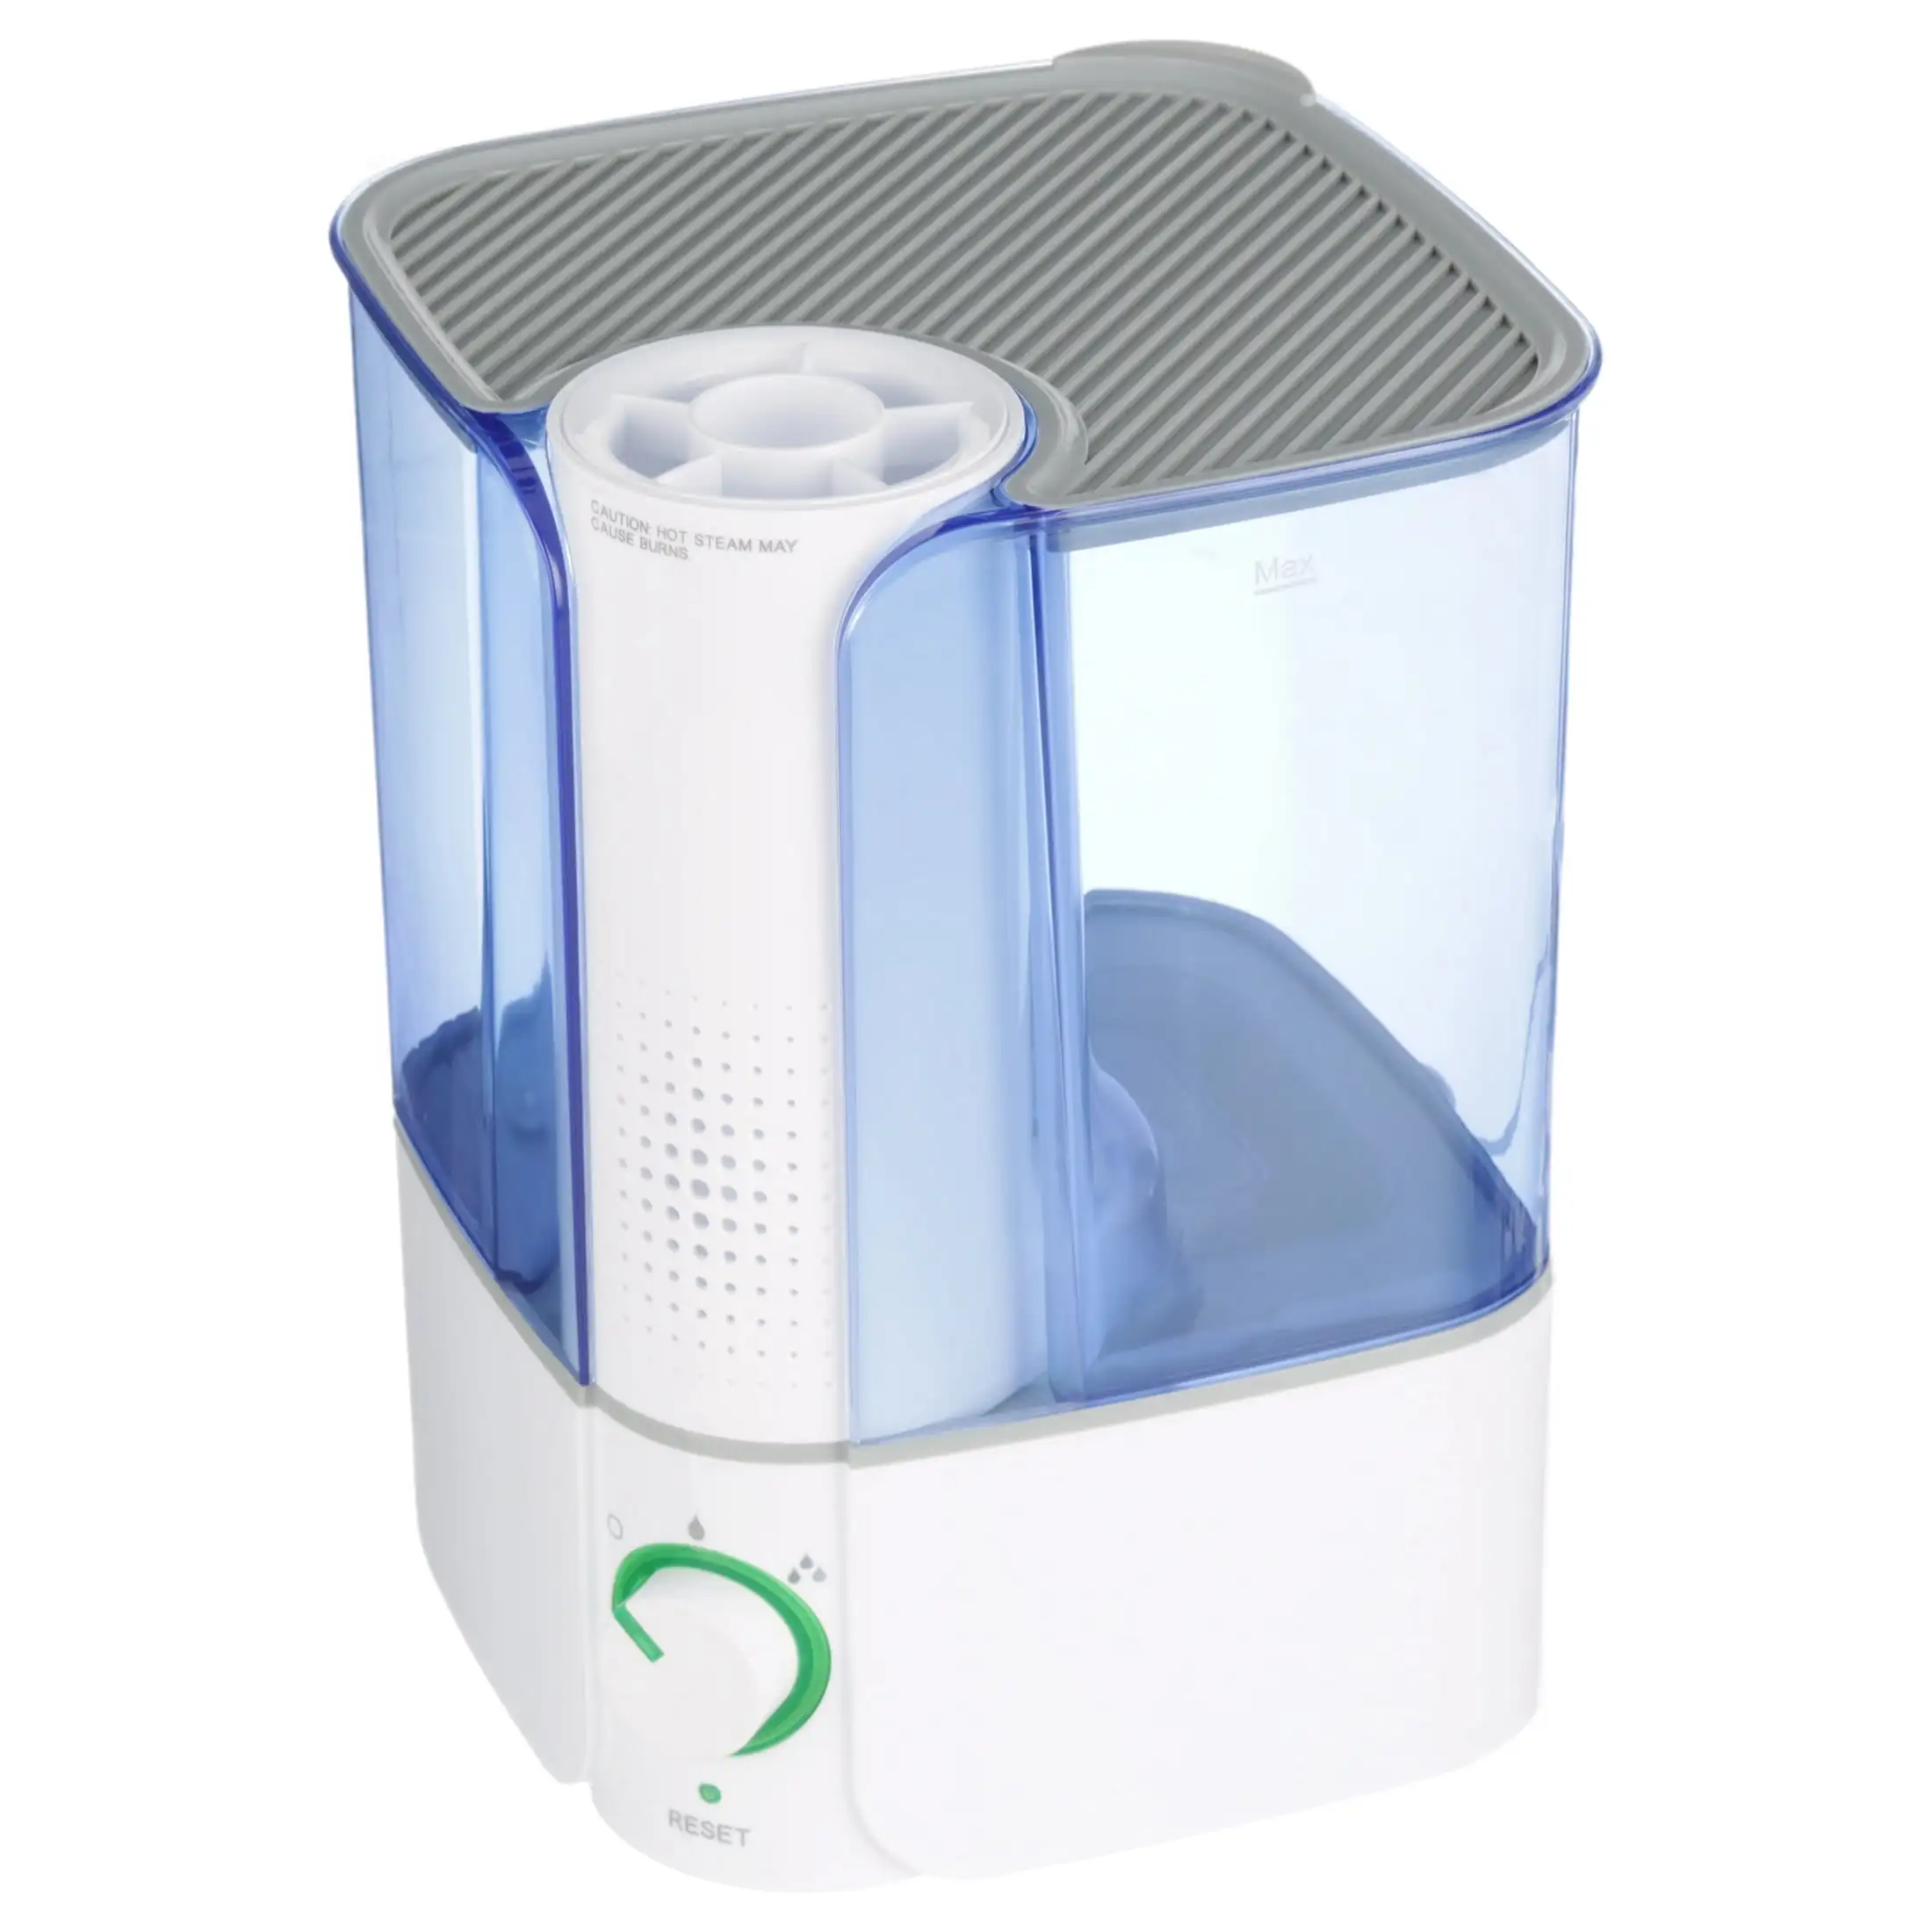 

Equate Warm Mist Humidifier Visible Filter Free White & Blue Top Fill 1.3 Gallon Big Water Capacity